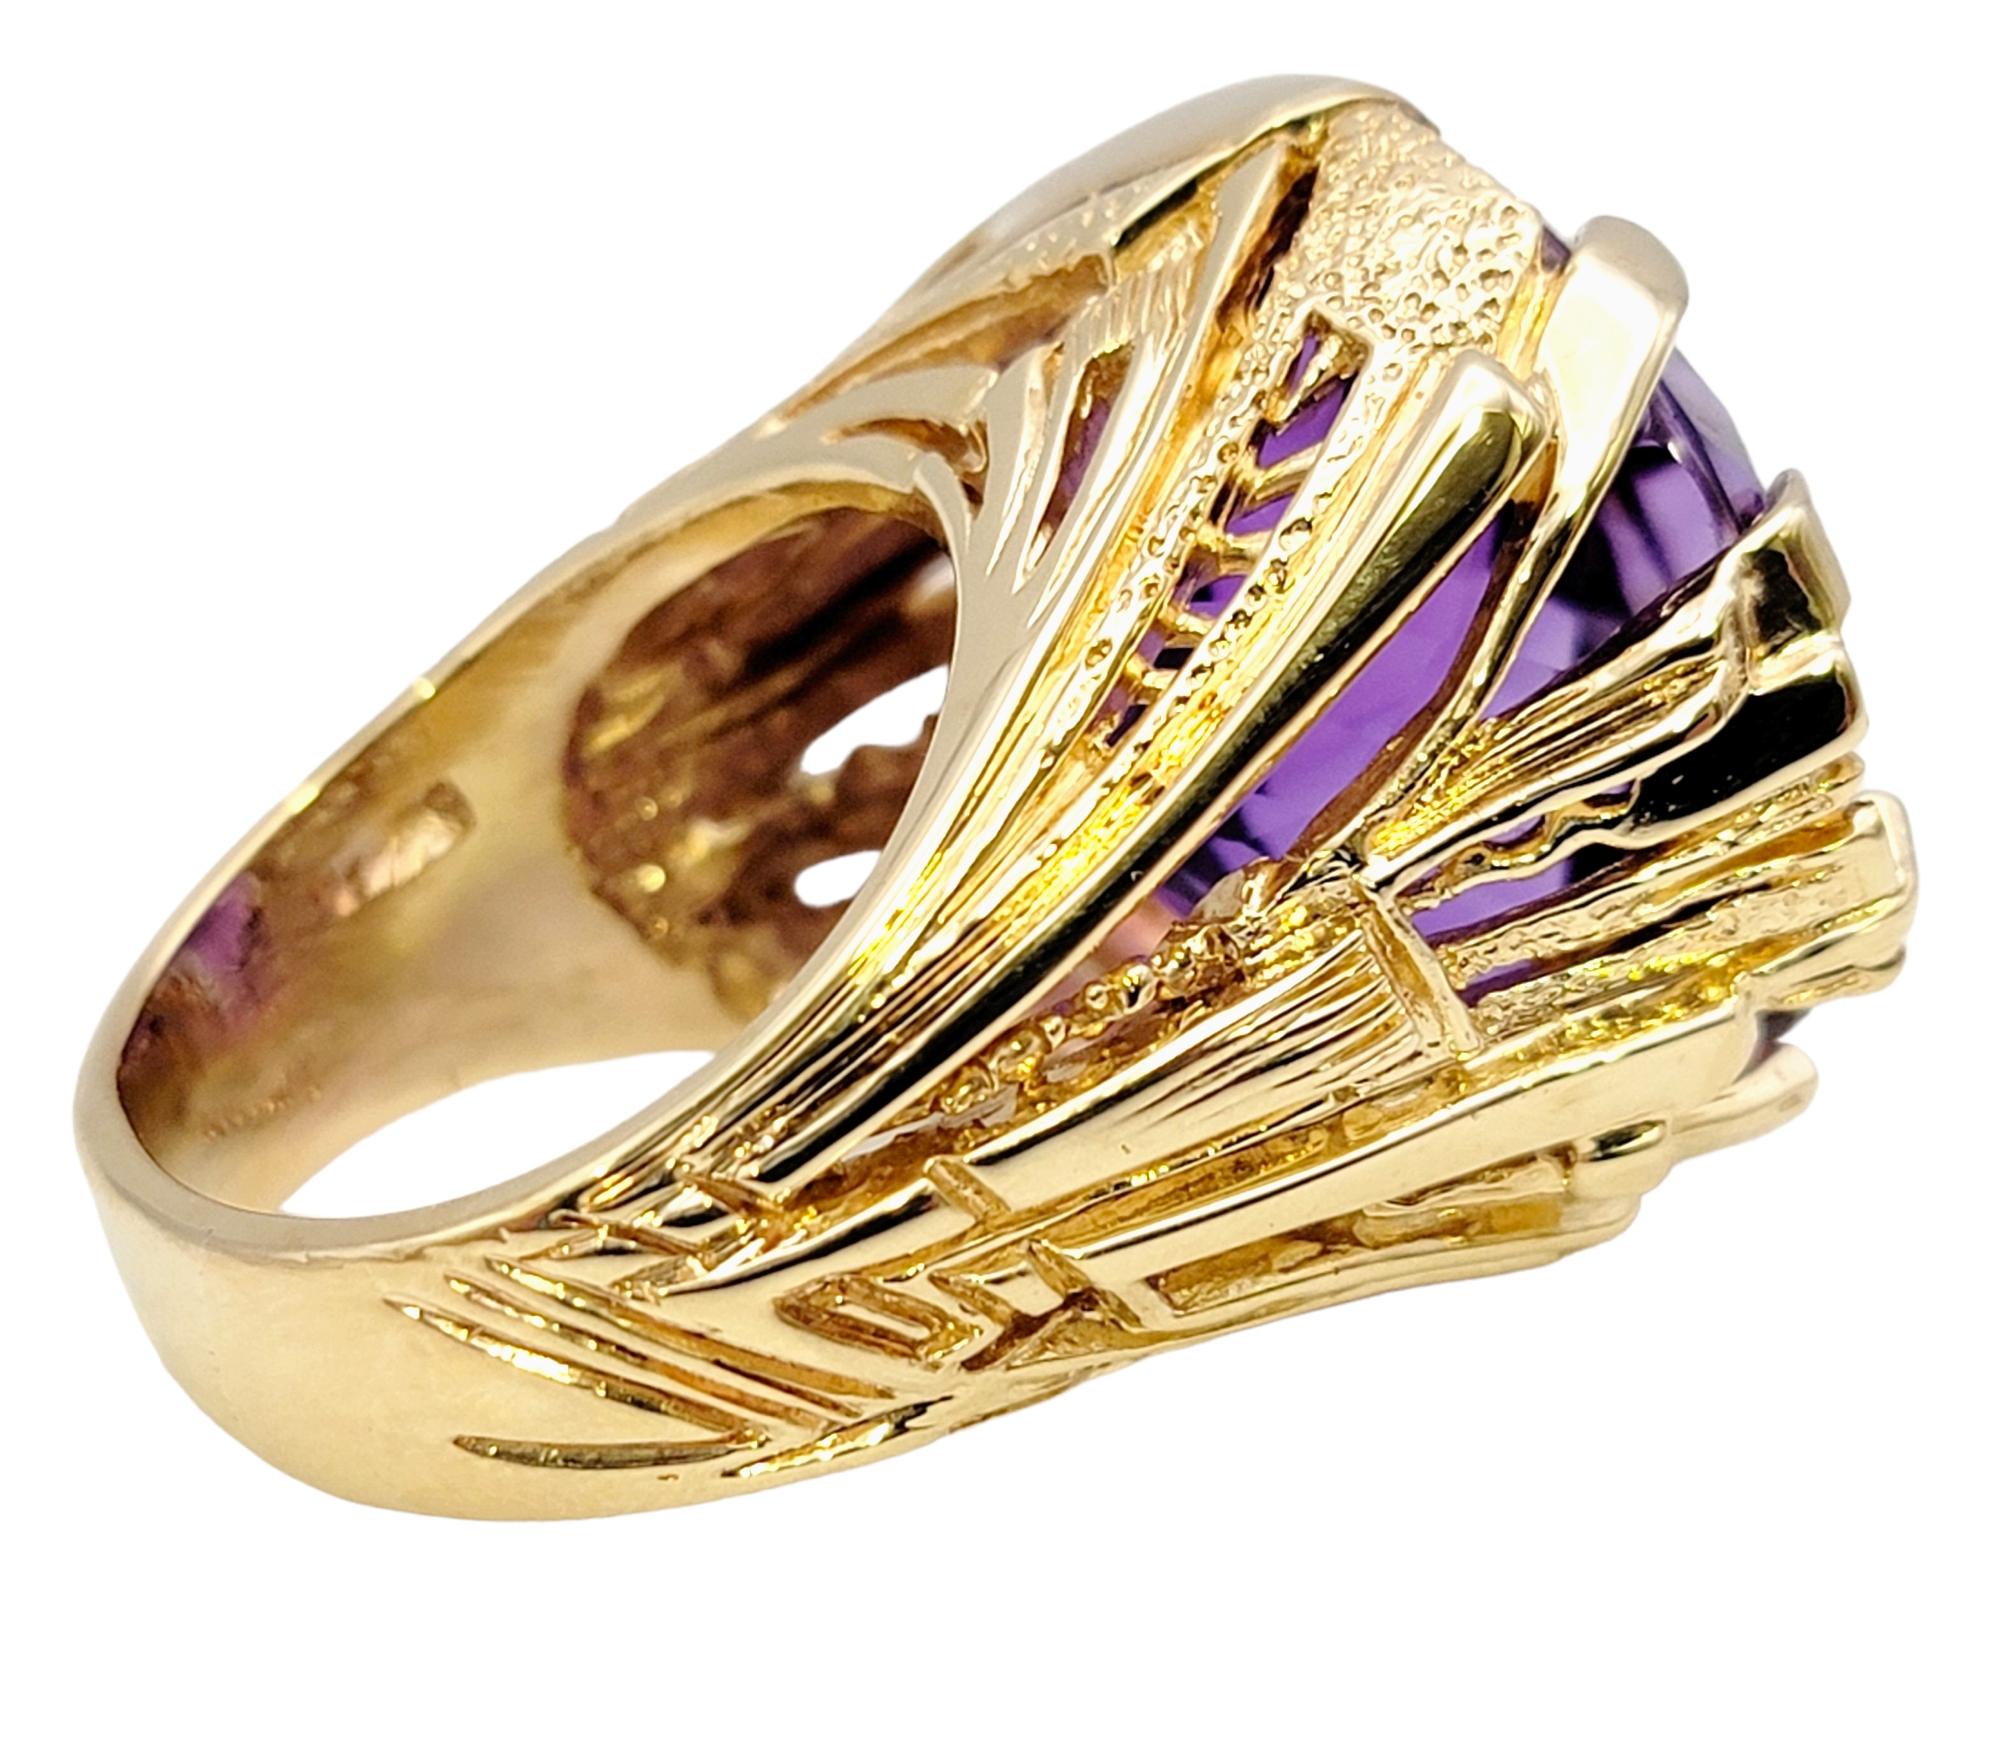 Massive 40.01 Carat Round Cut Amethyst Solitaire Cocktail Ring in Yellow Gold  In Good Condition For Sale In Scottsdale, AZ